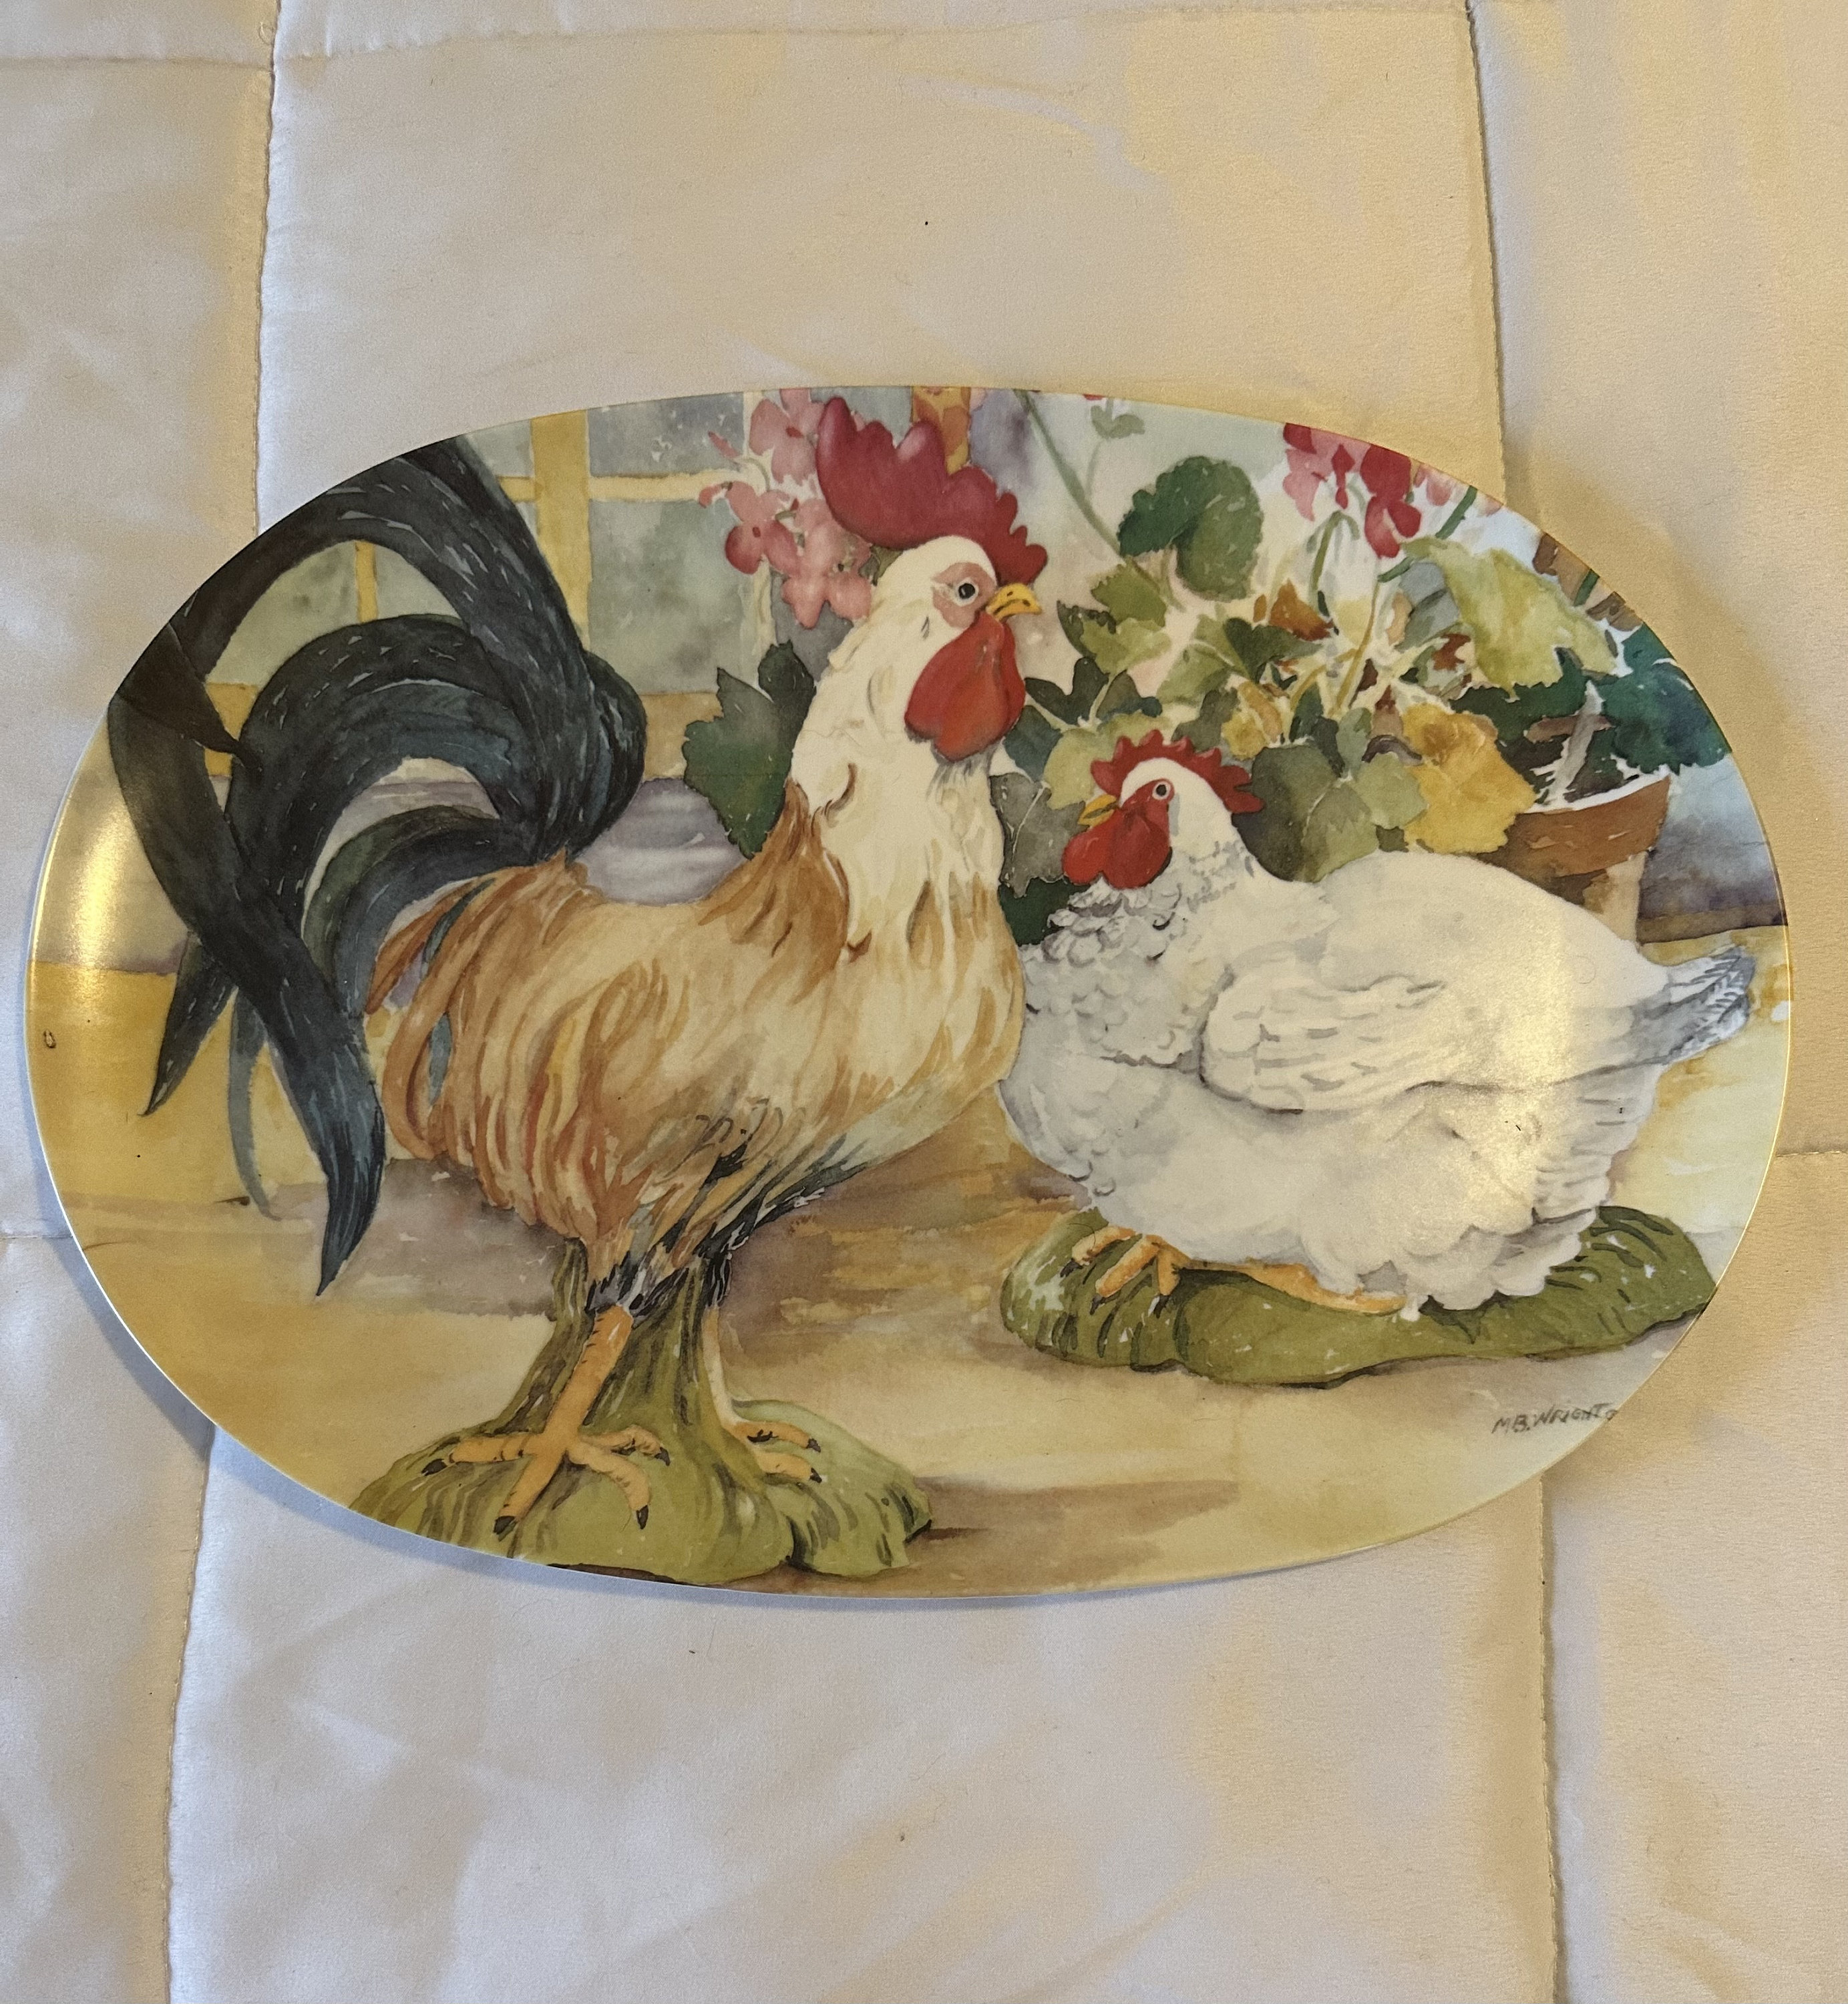 520 Best {Rooster Decor} ideas  rooster decor, rooster, chickens and  roosters